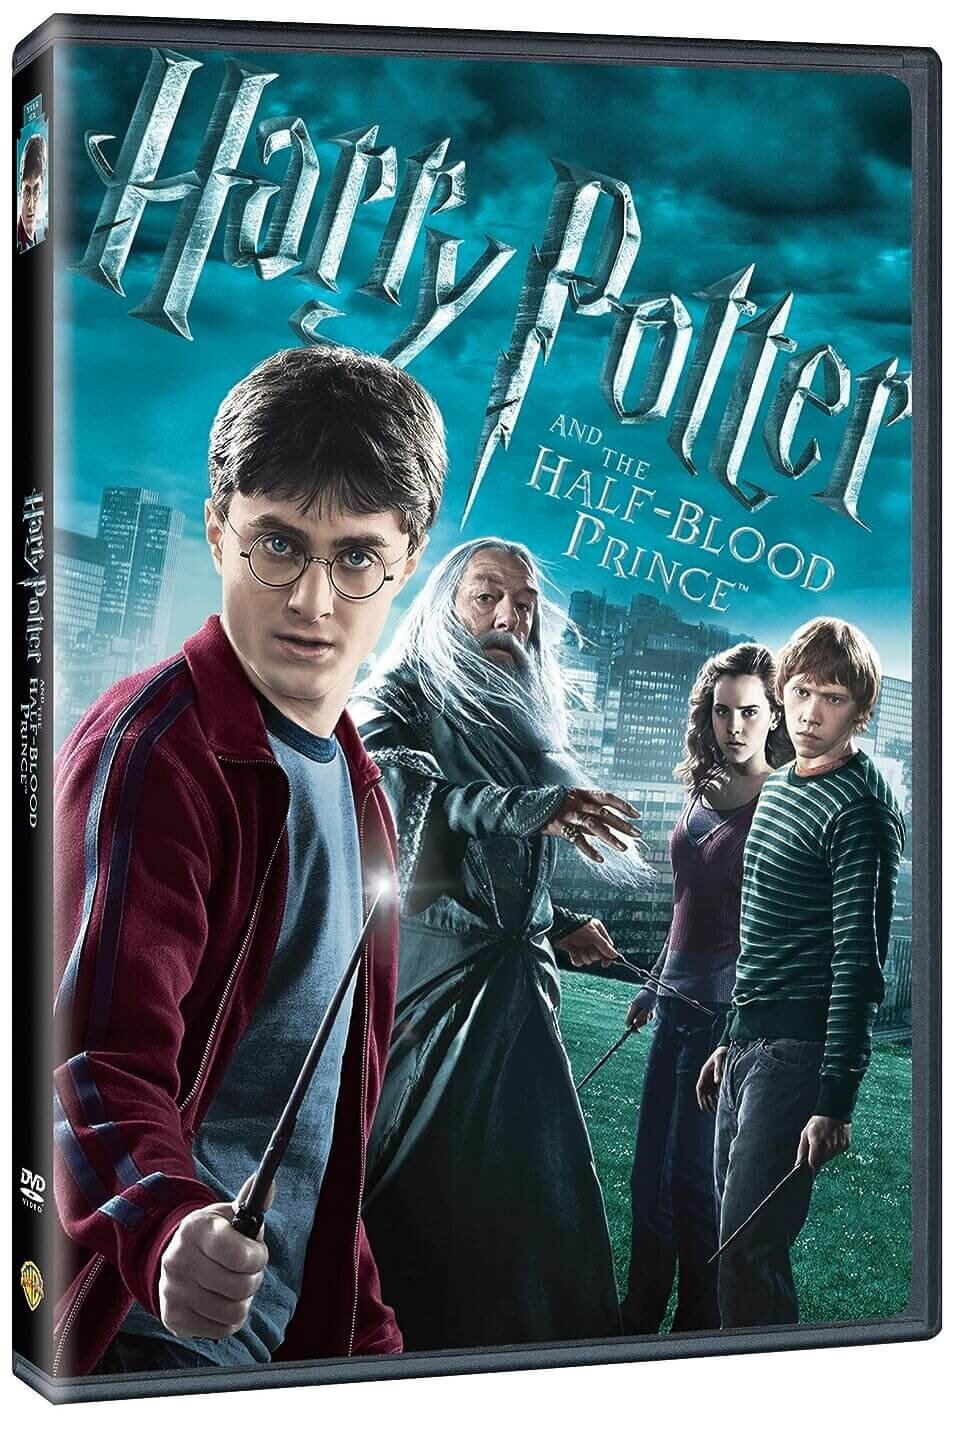 “Harry Potter and the Half-Blood Prince” (2009)